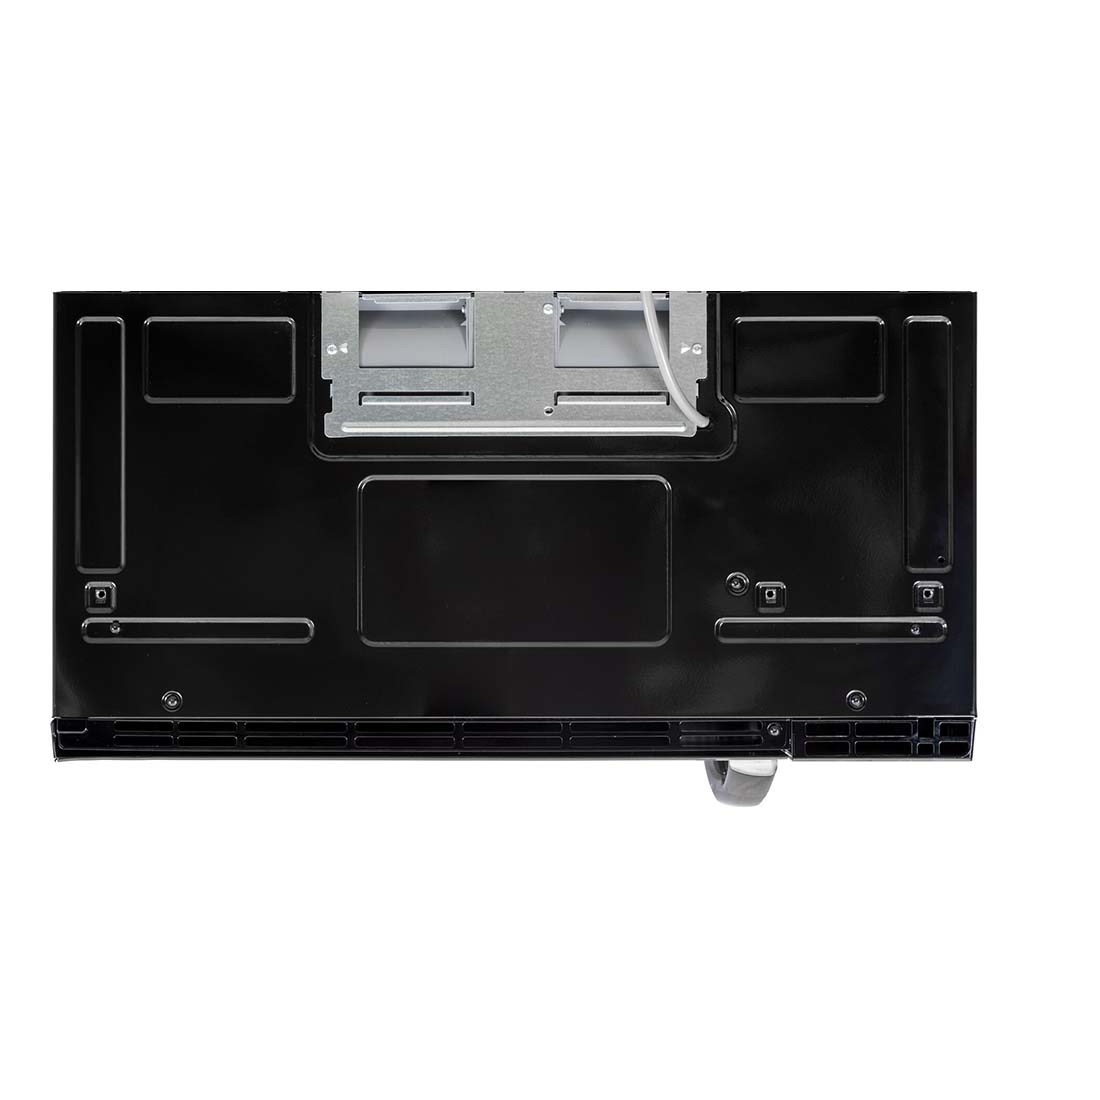 Forté 30 in. 1.5 cu. ft. Over the Range Microwave in Stainless Steel mounting brackets.